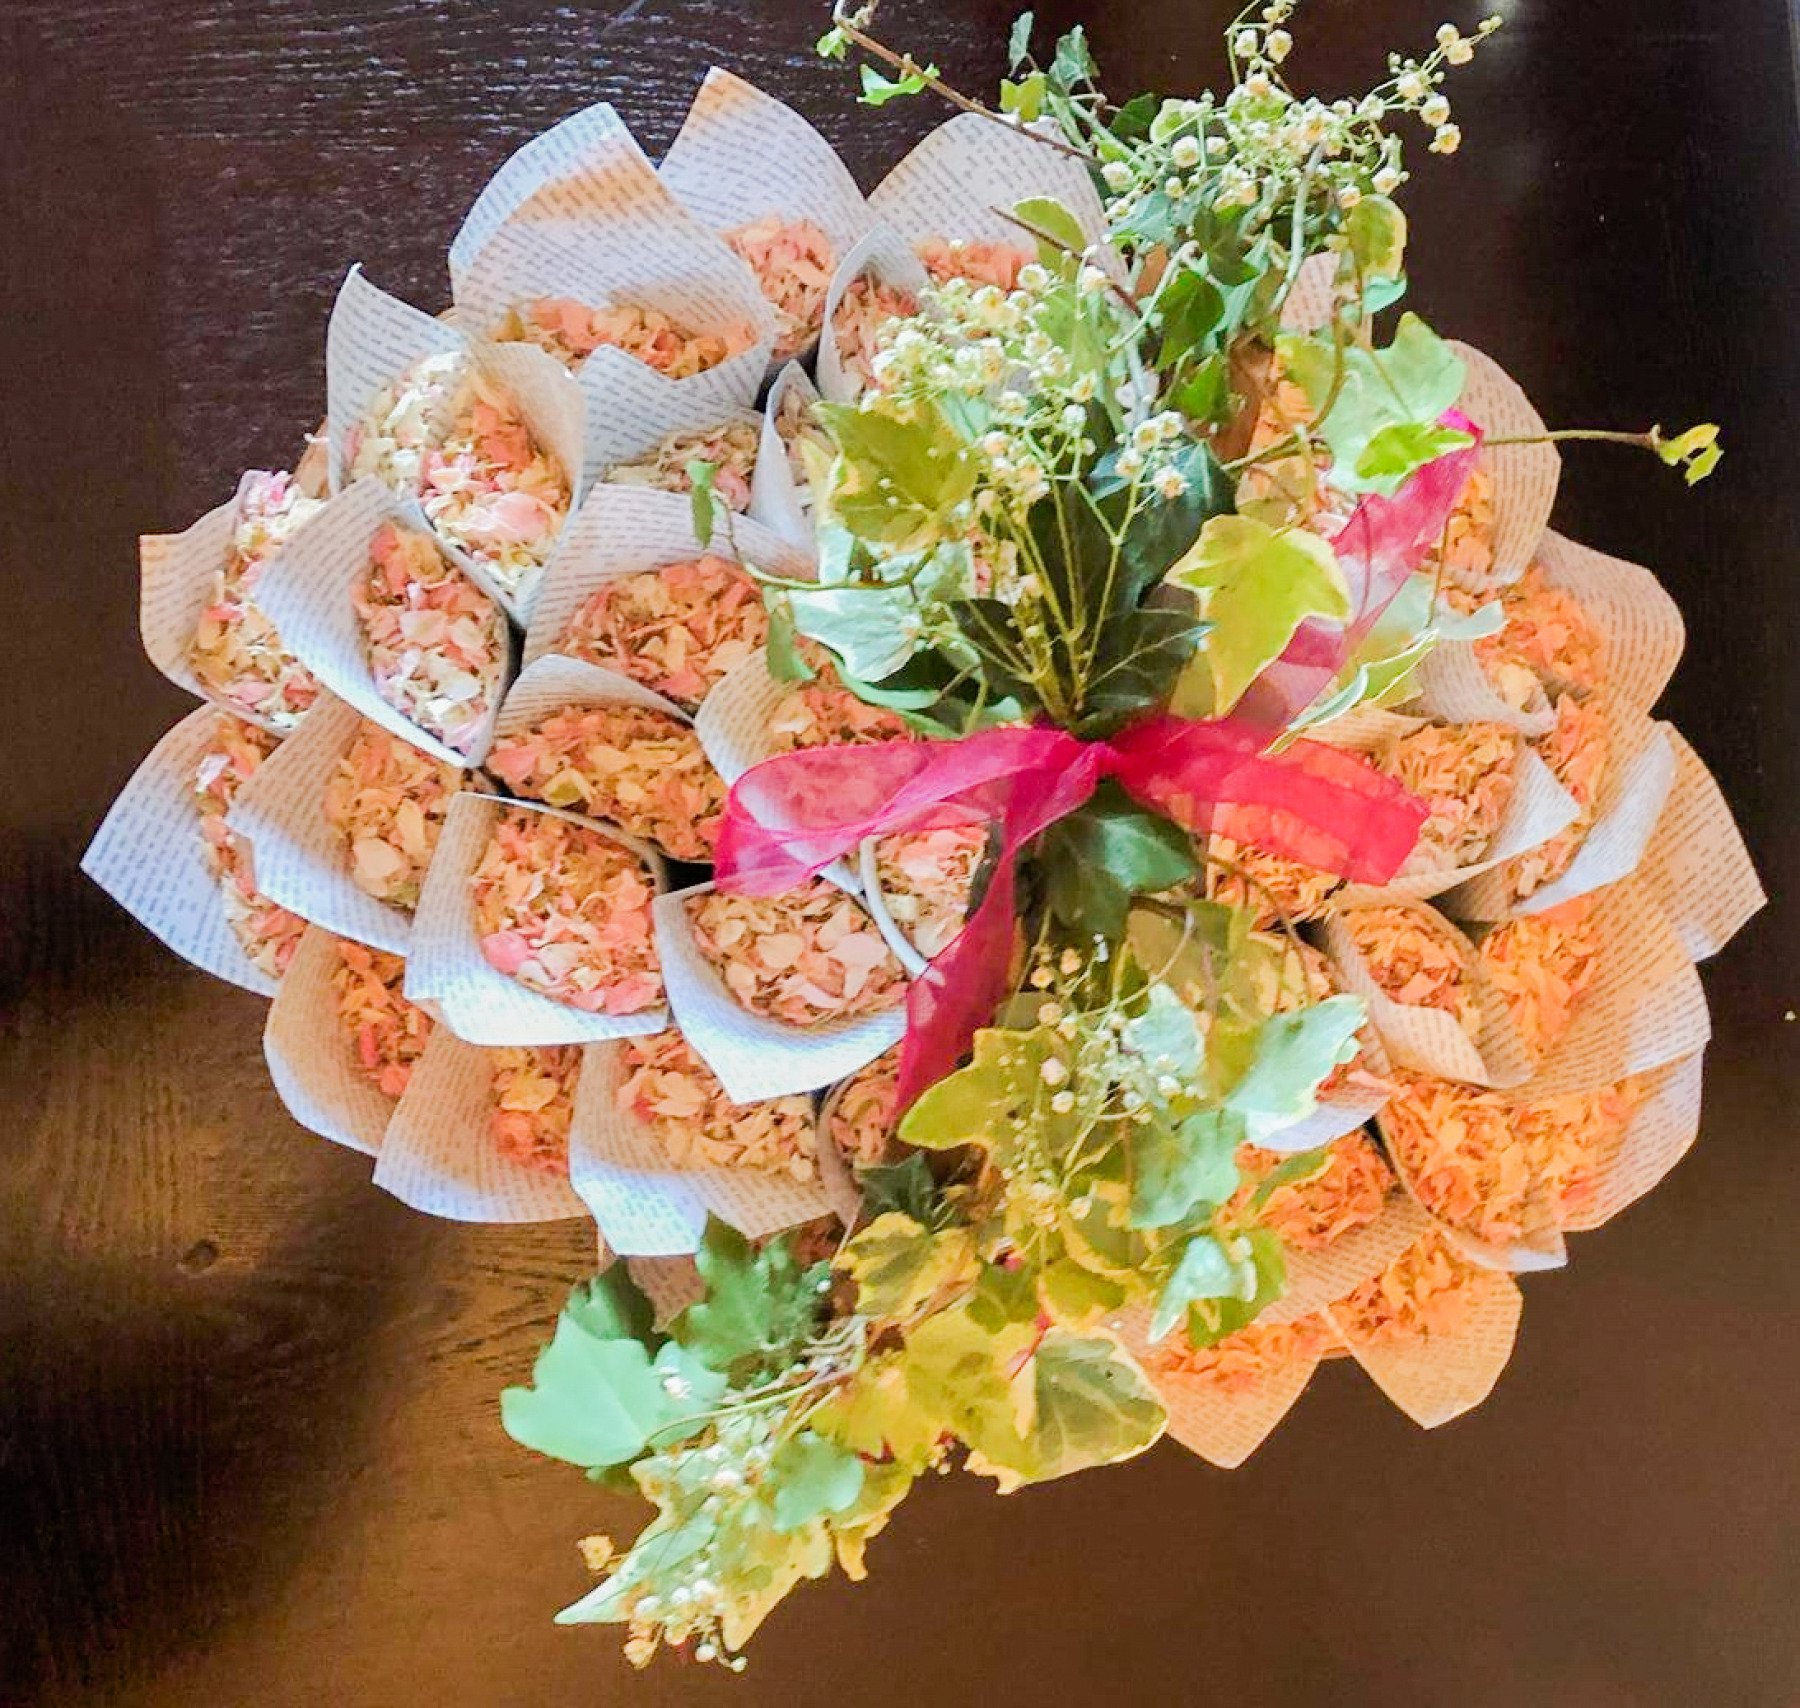 A close up of confetti cones, full of pink confetti and a green floral arrangement in the middle